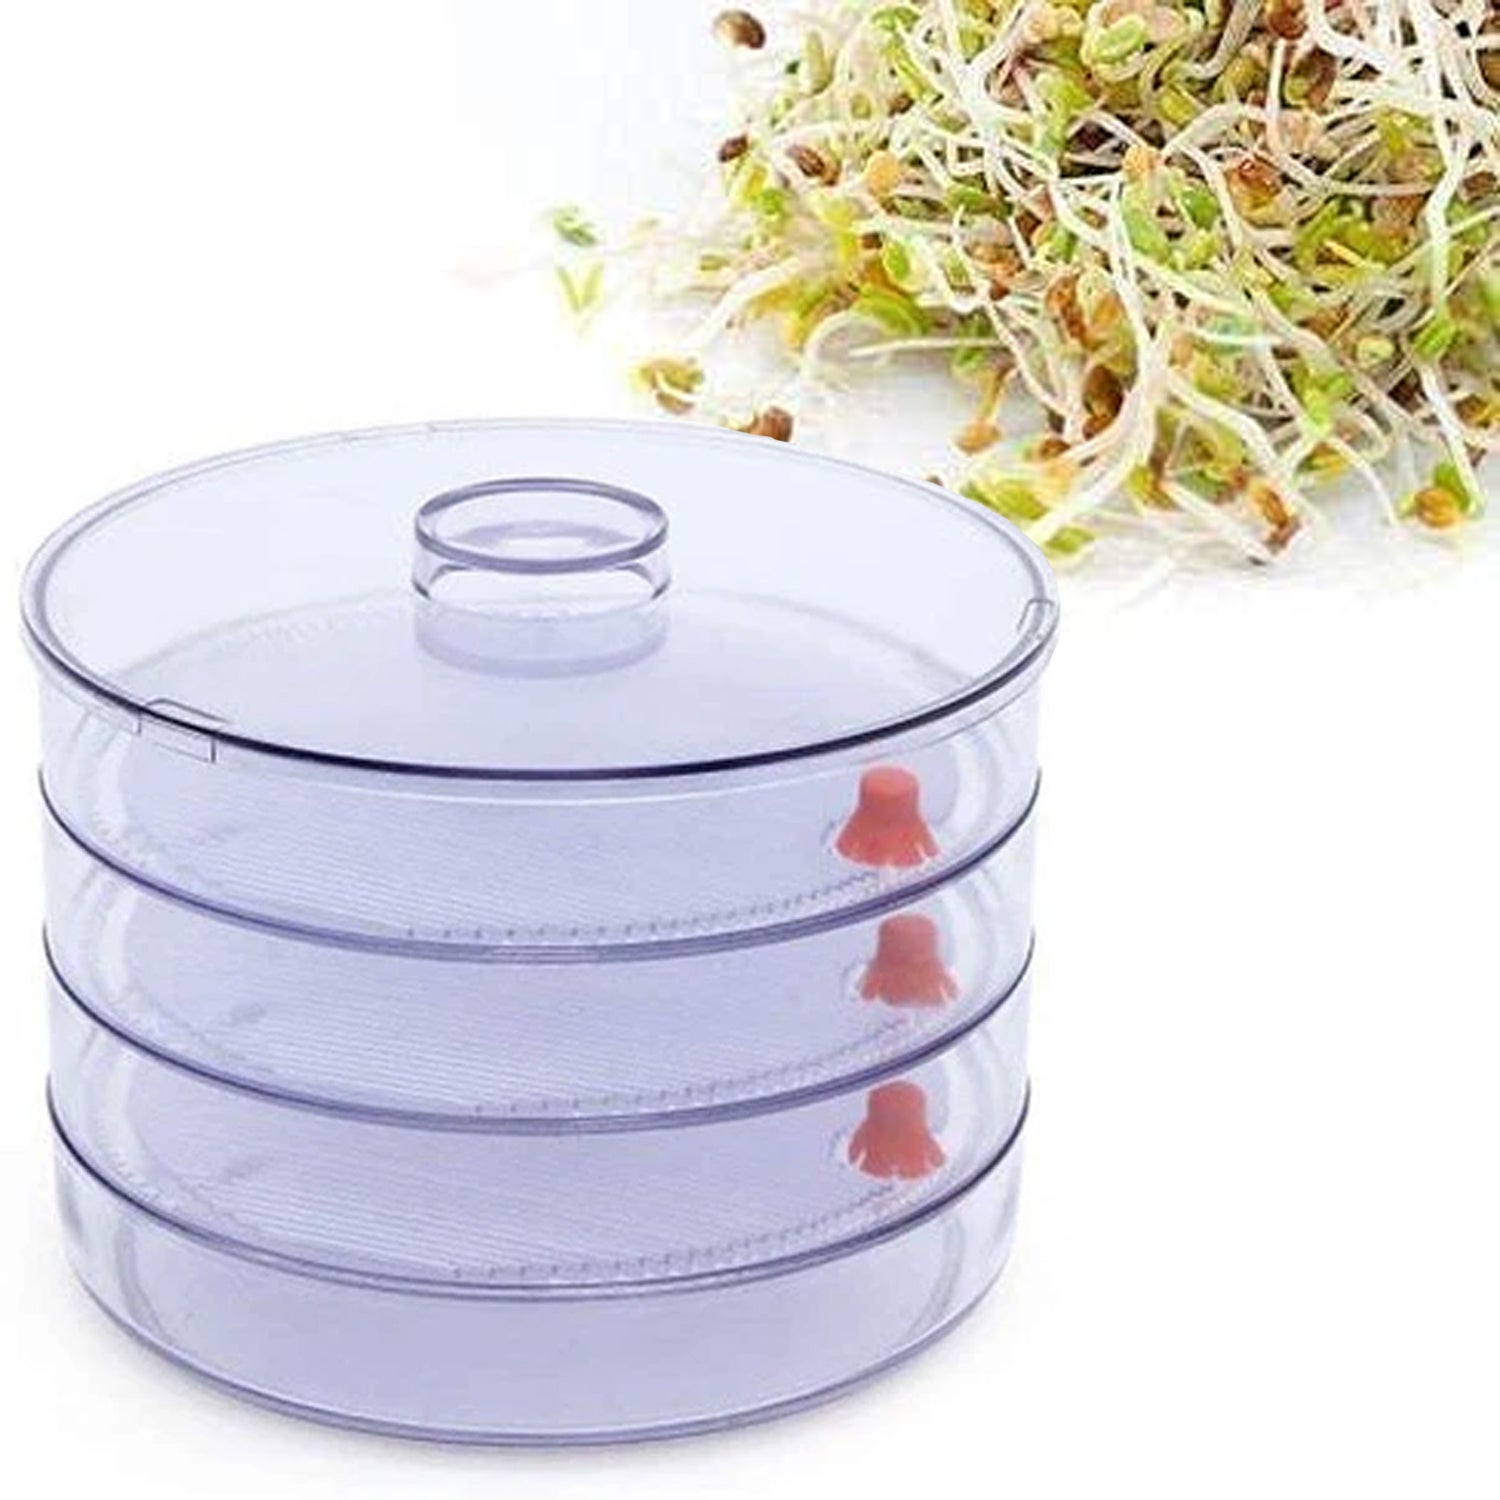 070 Plastic 4 Compartment Sprout Maker, White BUDGET HUB